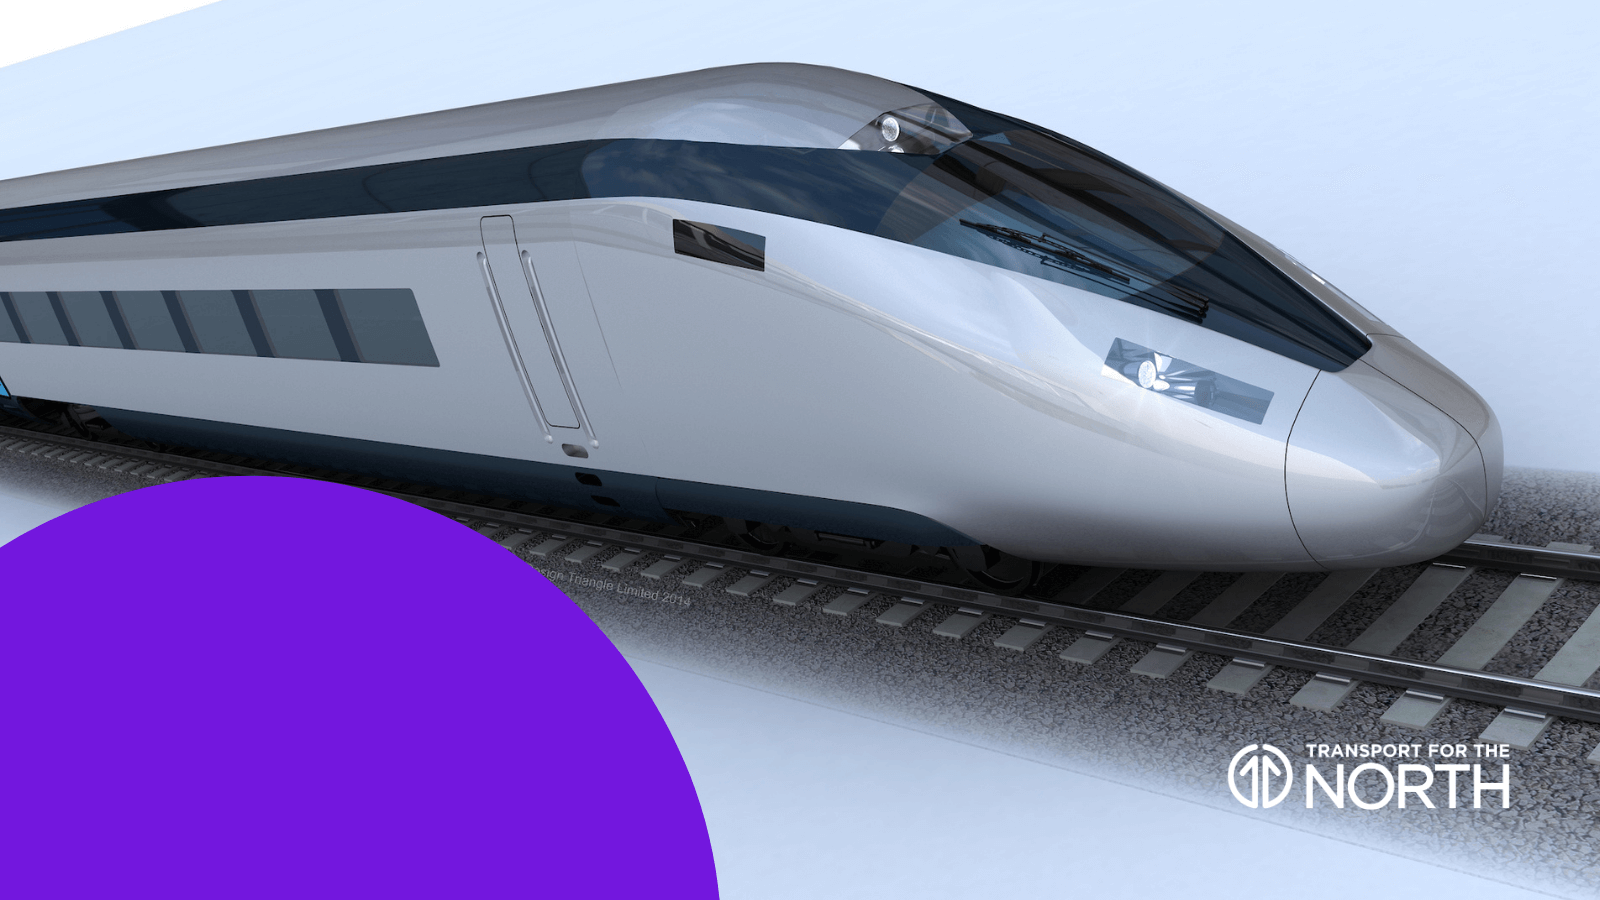 The High Speed North debate will focus on the vision to transform the North’s economy